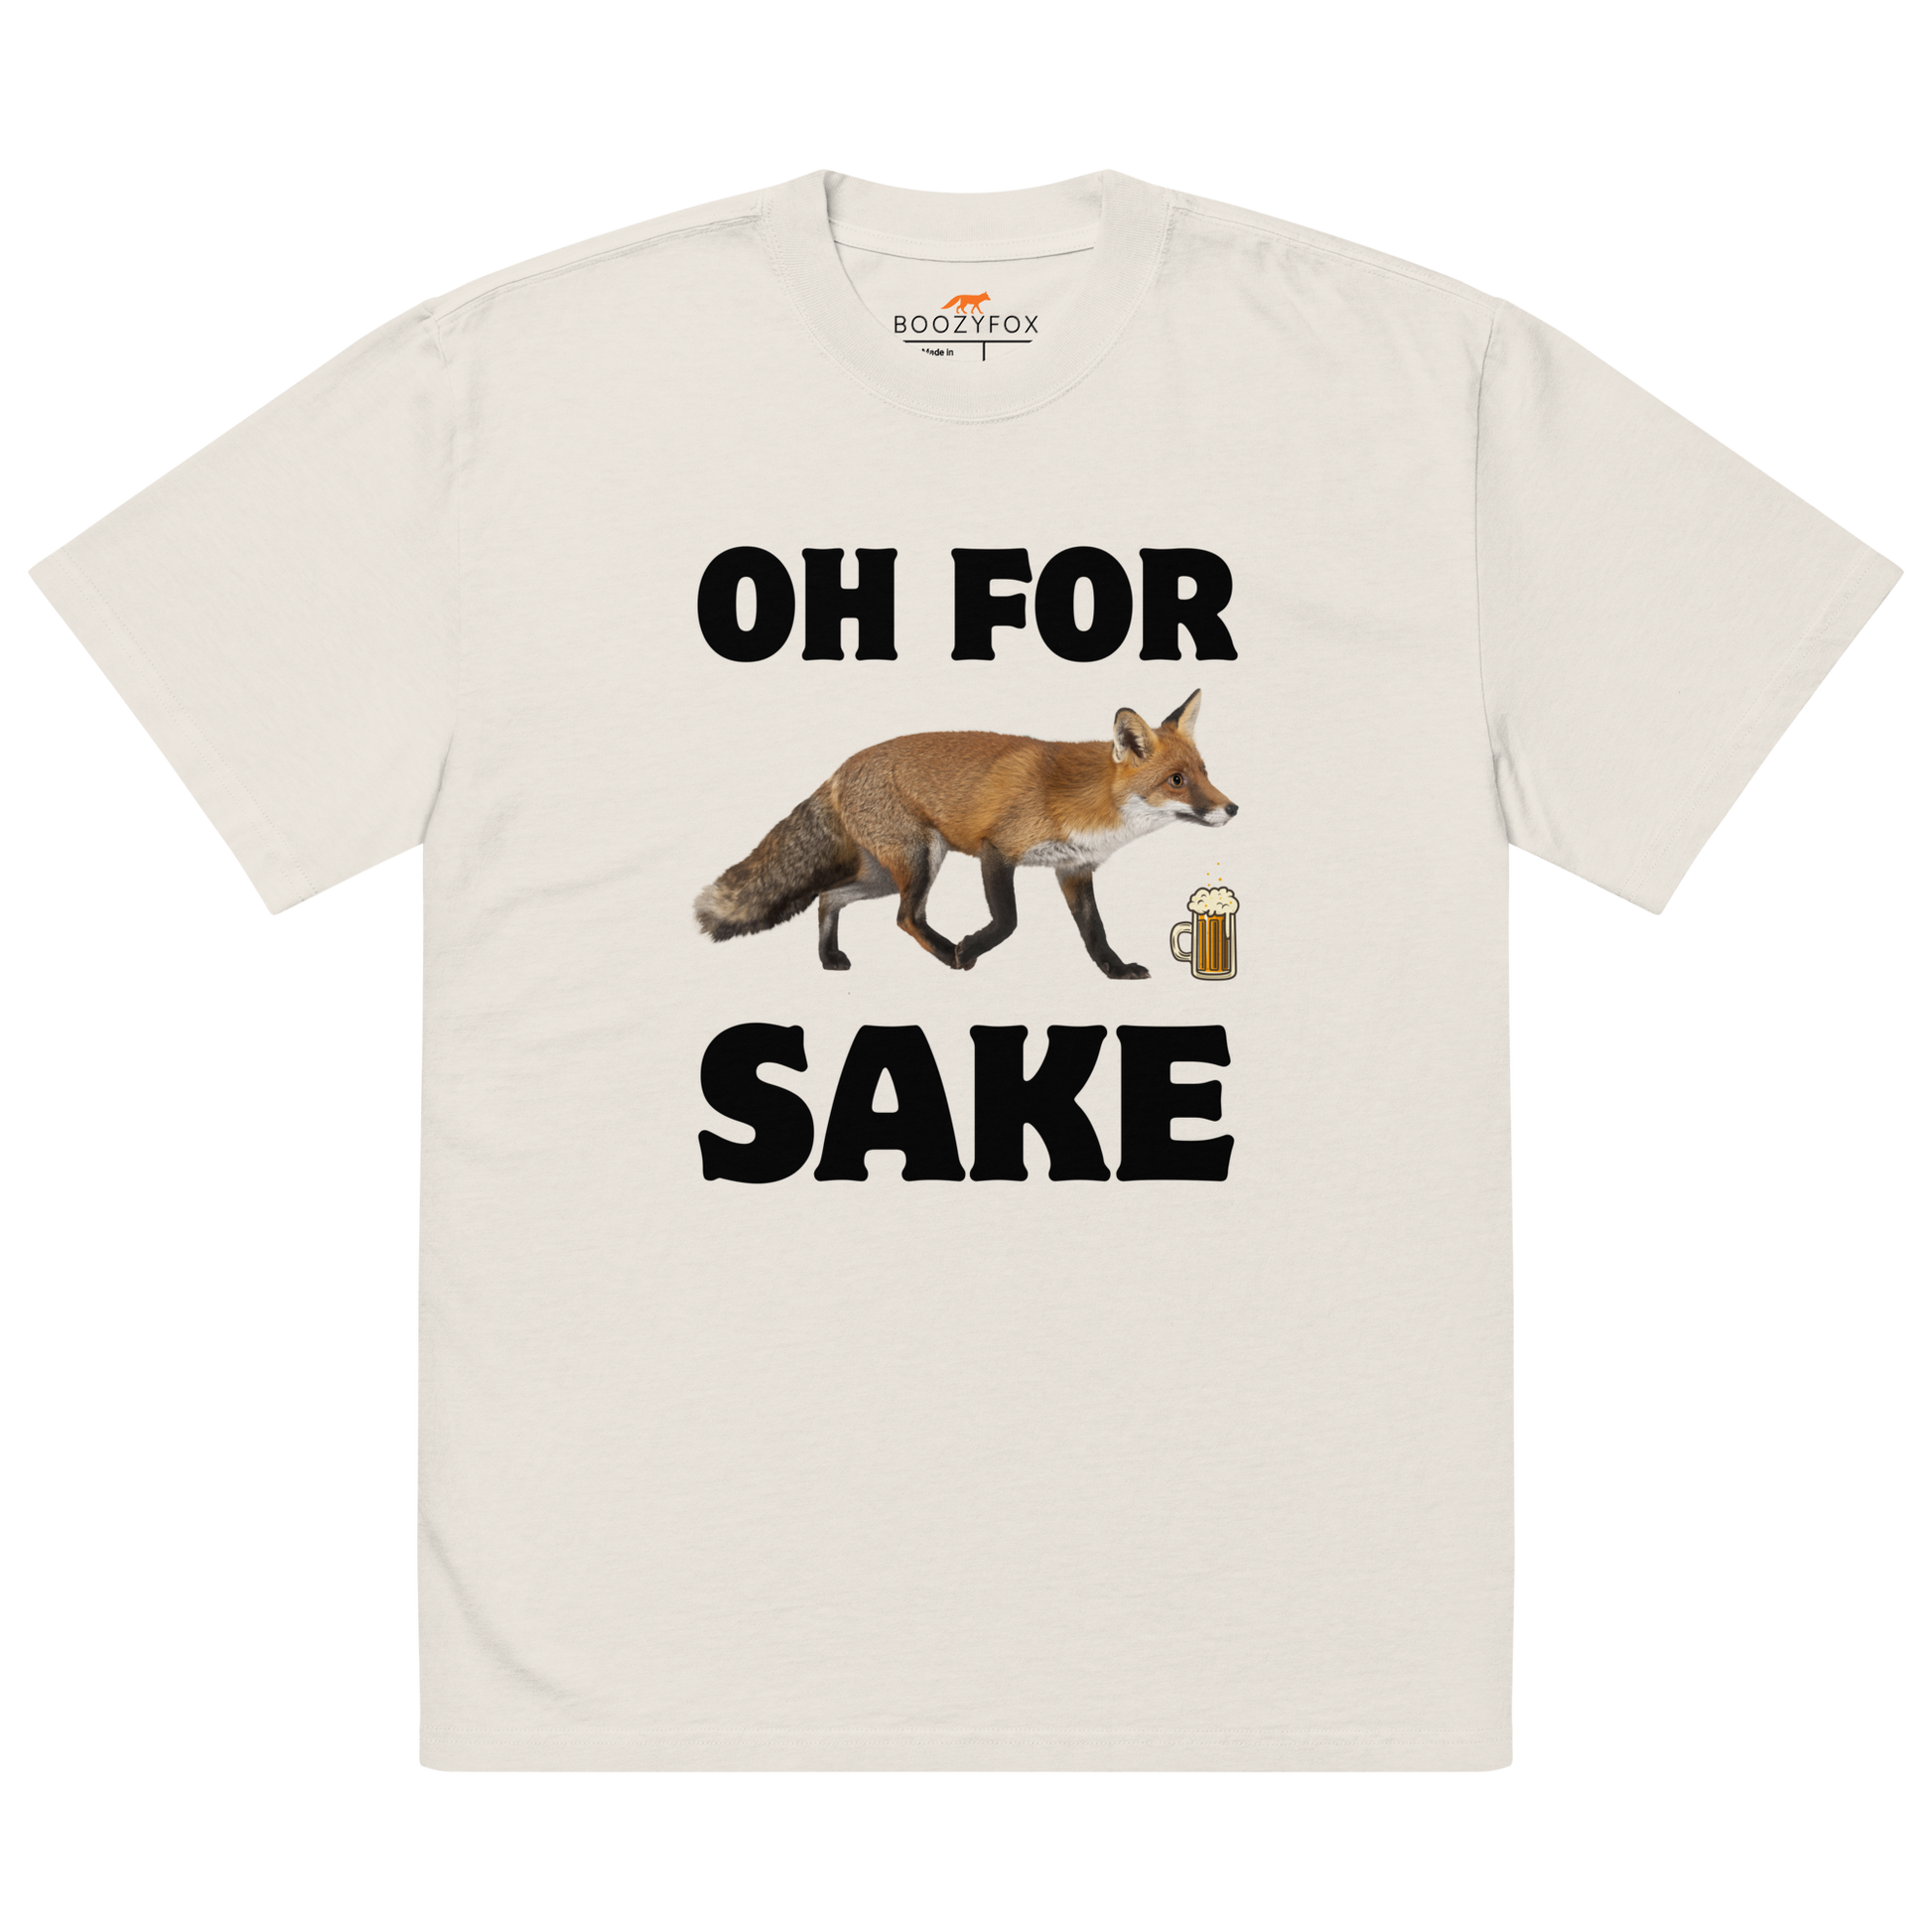 Faded Bone Fox Oversized T-Shirt featuring a Oh For Fox Sake graphic on the chest - Funny Graphic Fox Oversized Tees - Boozy Fox